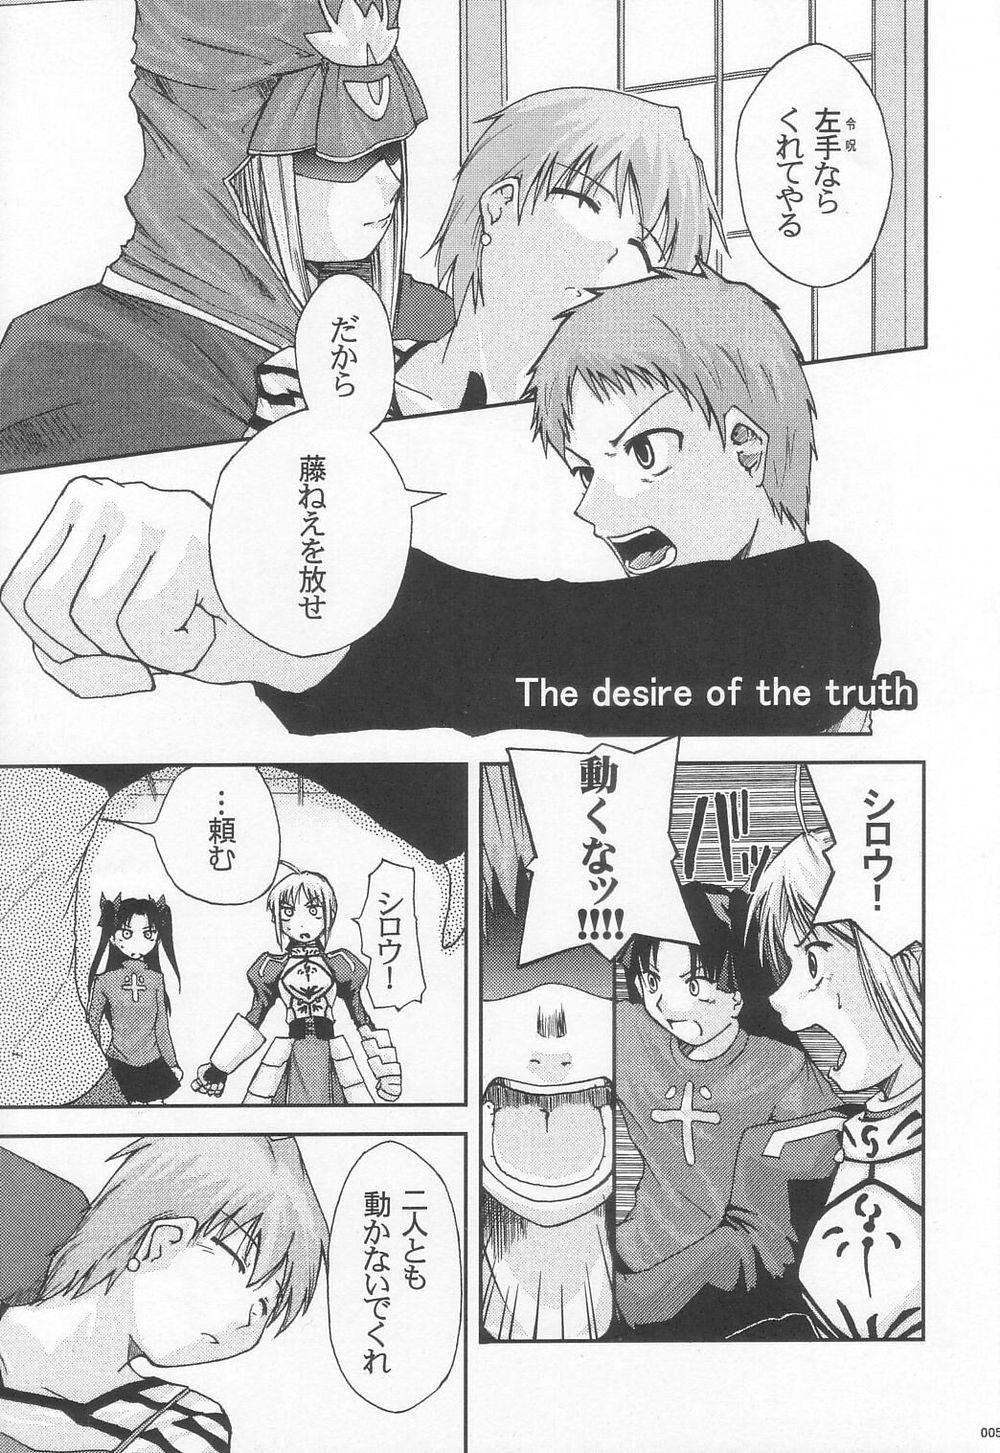 Stretch The desire of the truth - Fate stay night Sexy Girl - Page 4